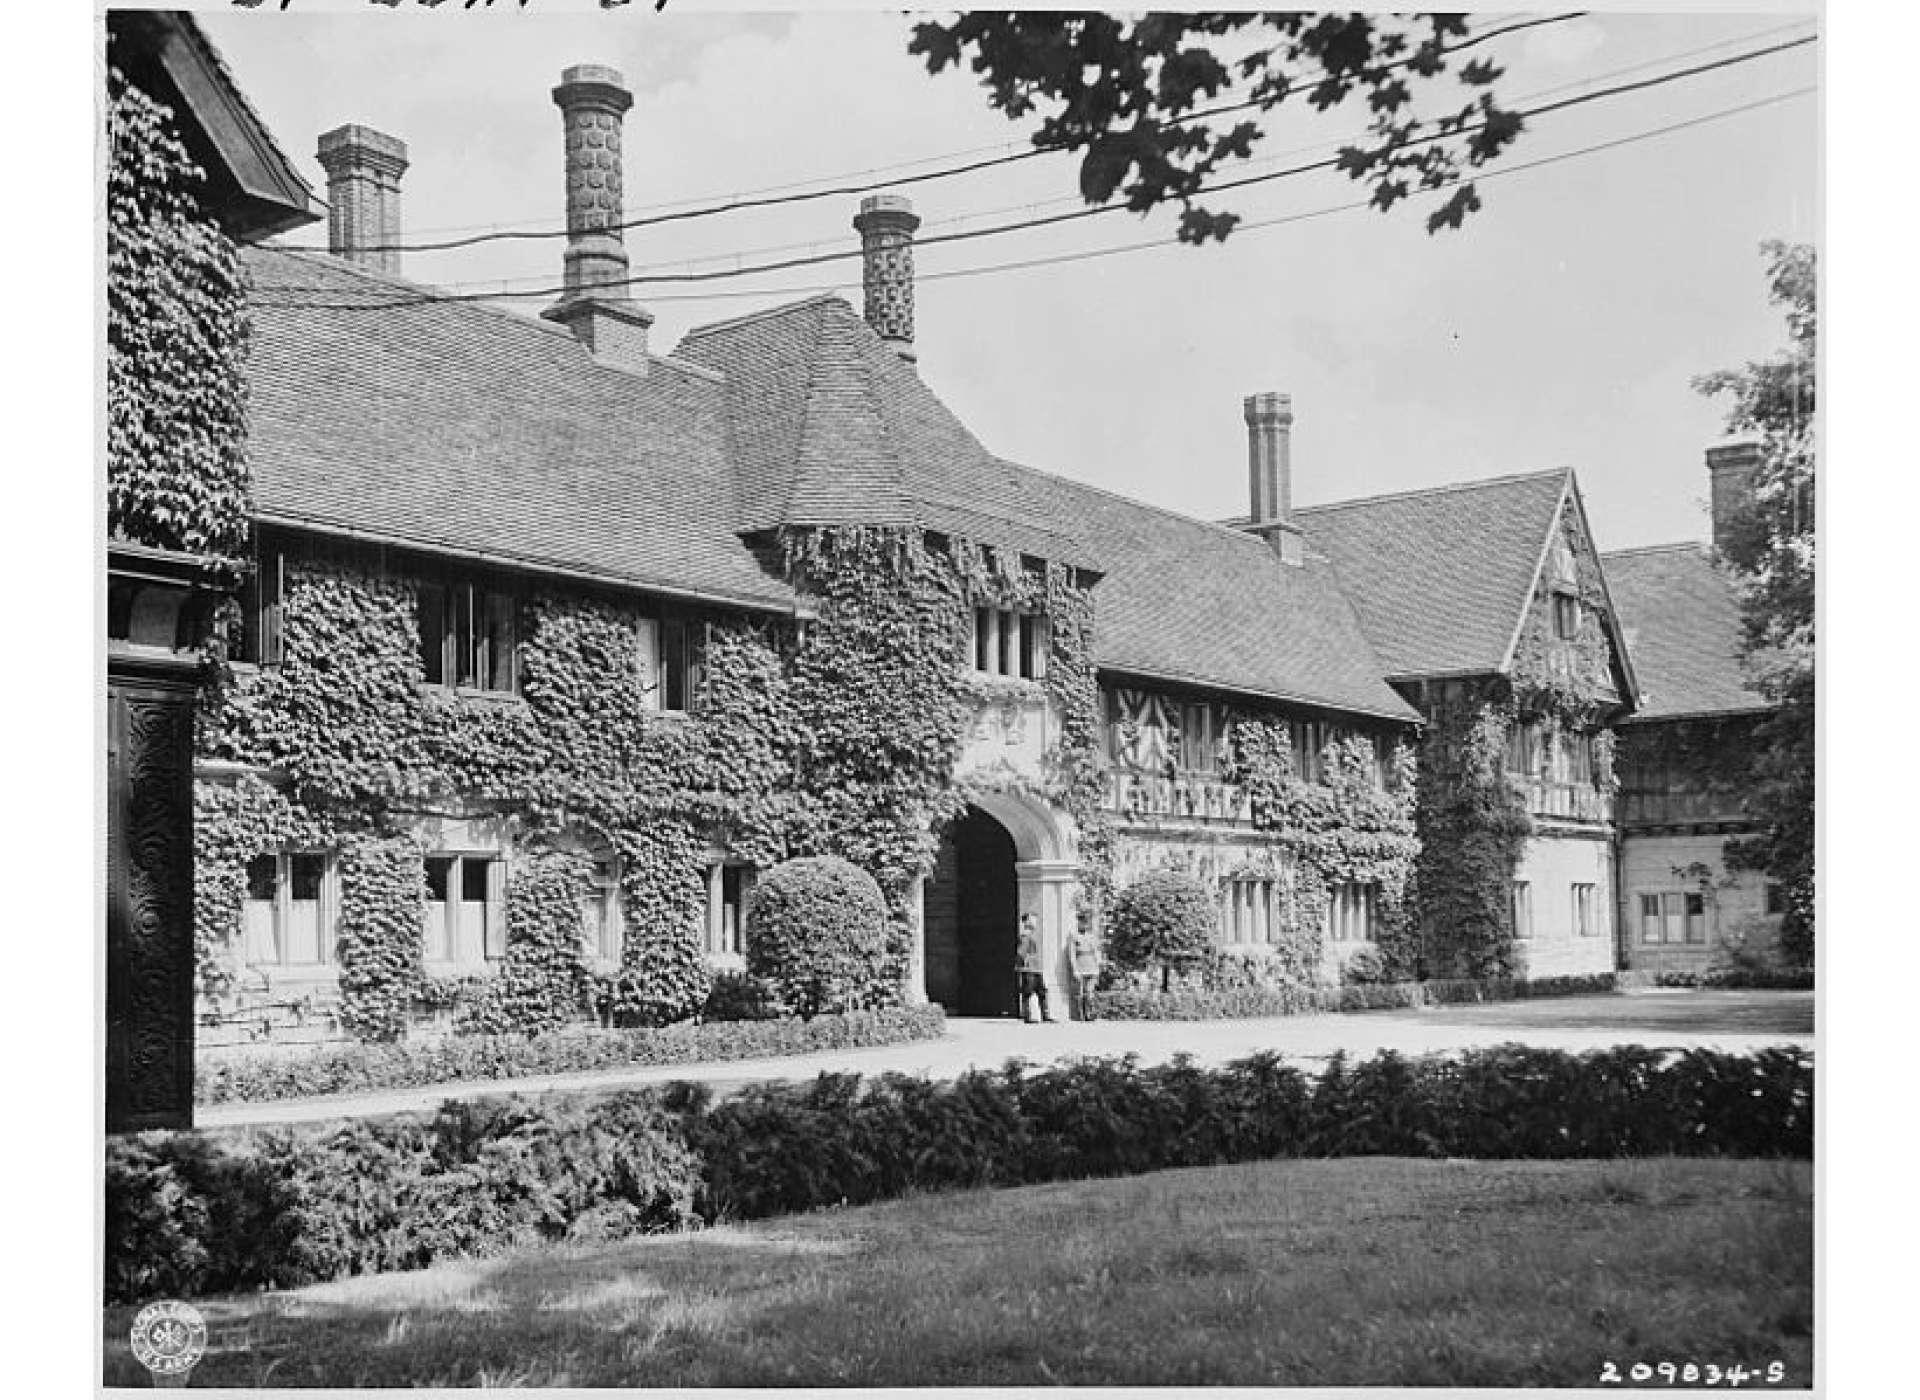 The Schlosse Cecilienhof, Potsdam, Germany, which was the site of the Potsdam Conference. Schlosse Cecilienhof was formerly the palace of the wife of Wilhelm II, Crown Prince of Germany. “The Schlosse Cecilienhof, Potsdam, Germany,” July 13, 1945, National Archives and Records Administration, Office of Presidential Libraries, Harry S. Truman Library, (NAID) 198948.